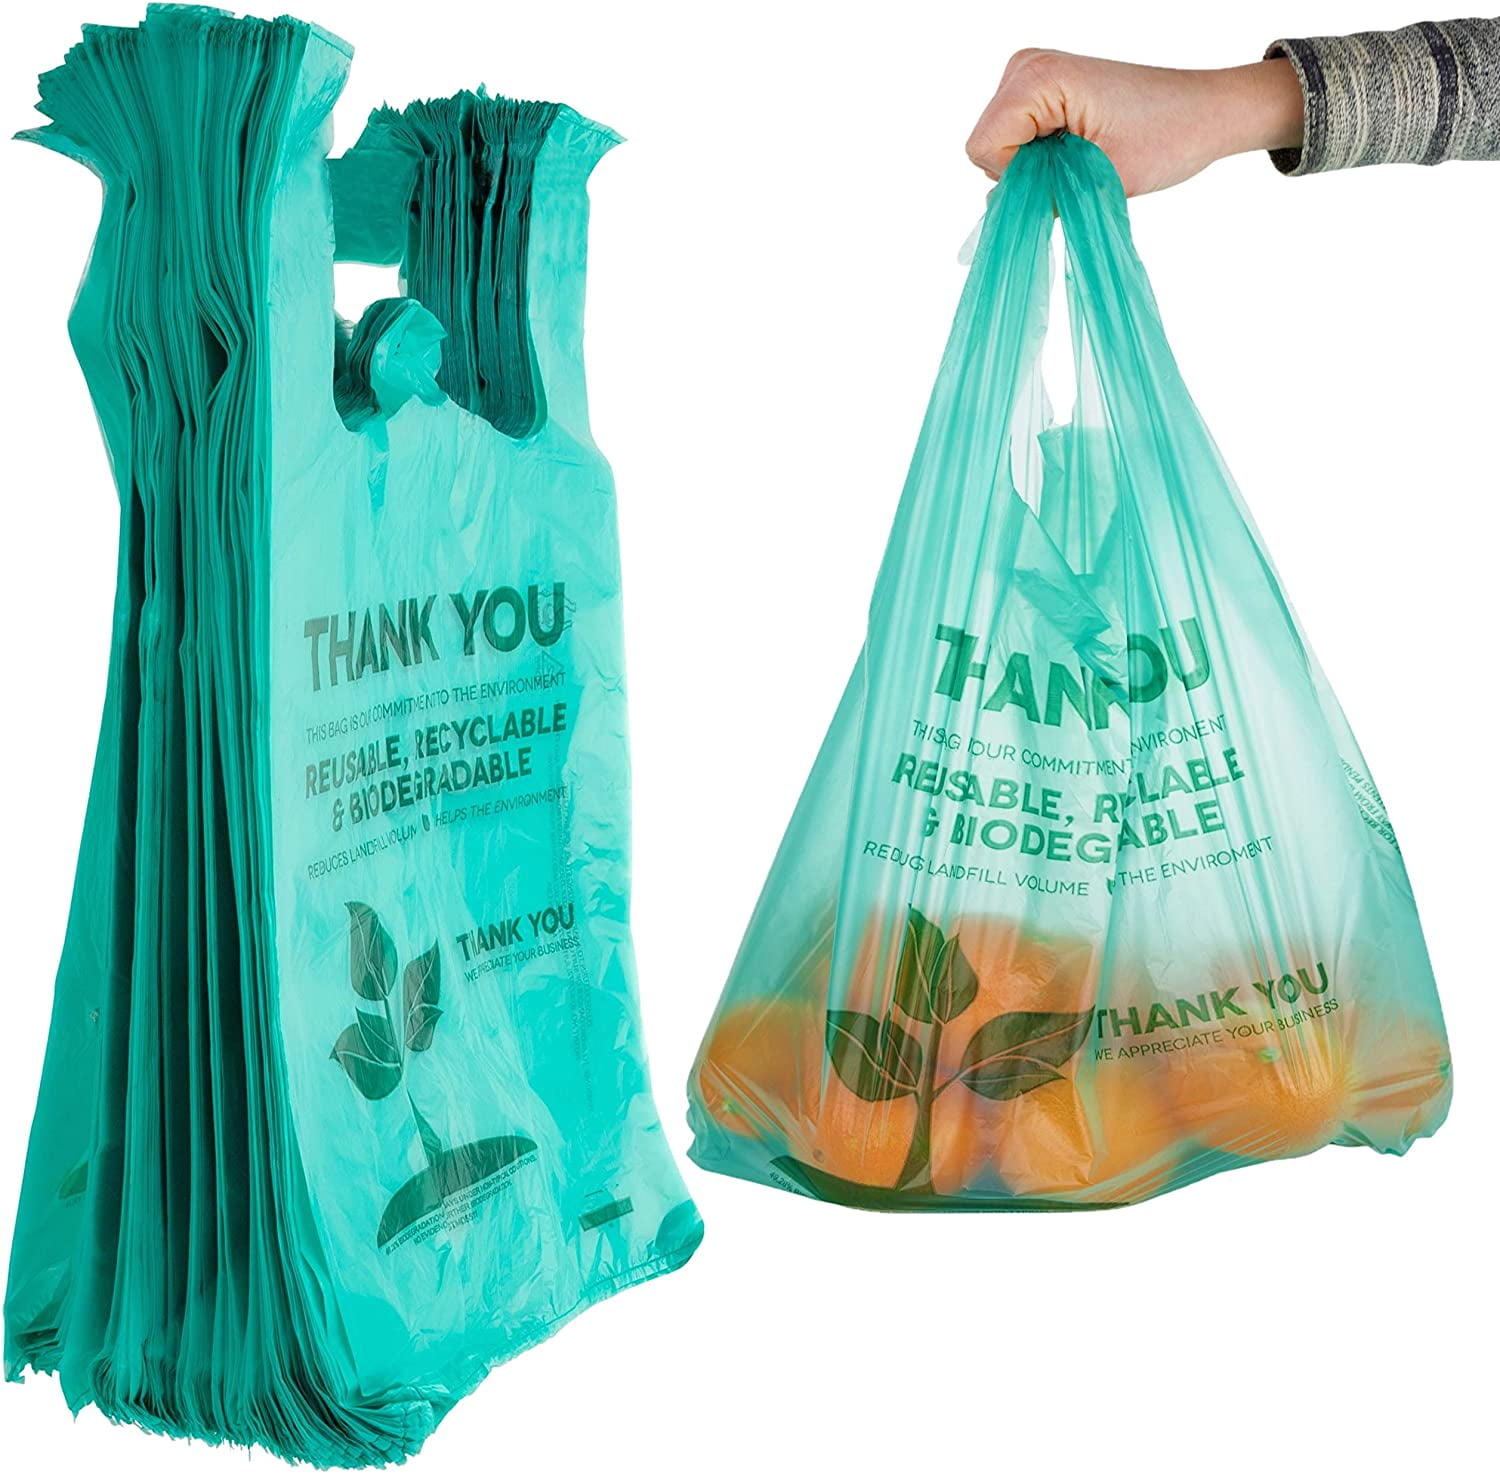 Reusable grocery bags aren't as environmentally friendly as you might think